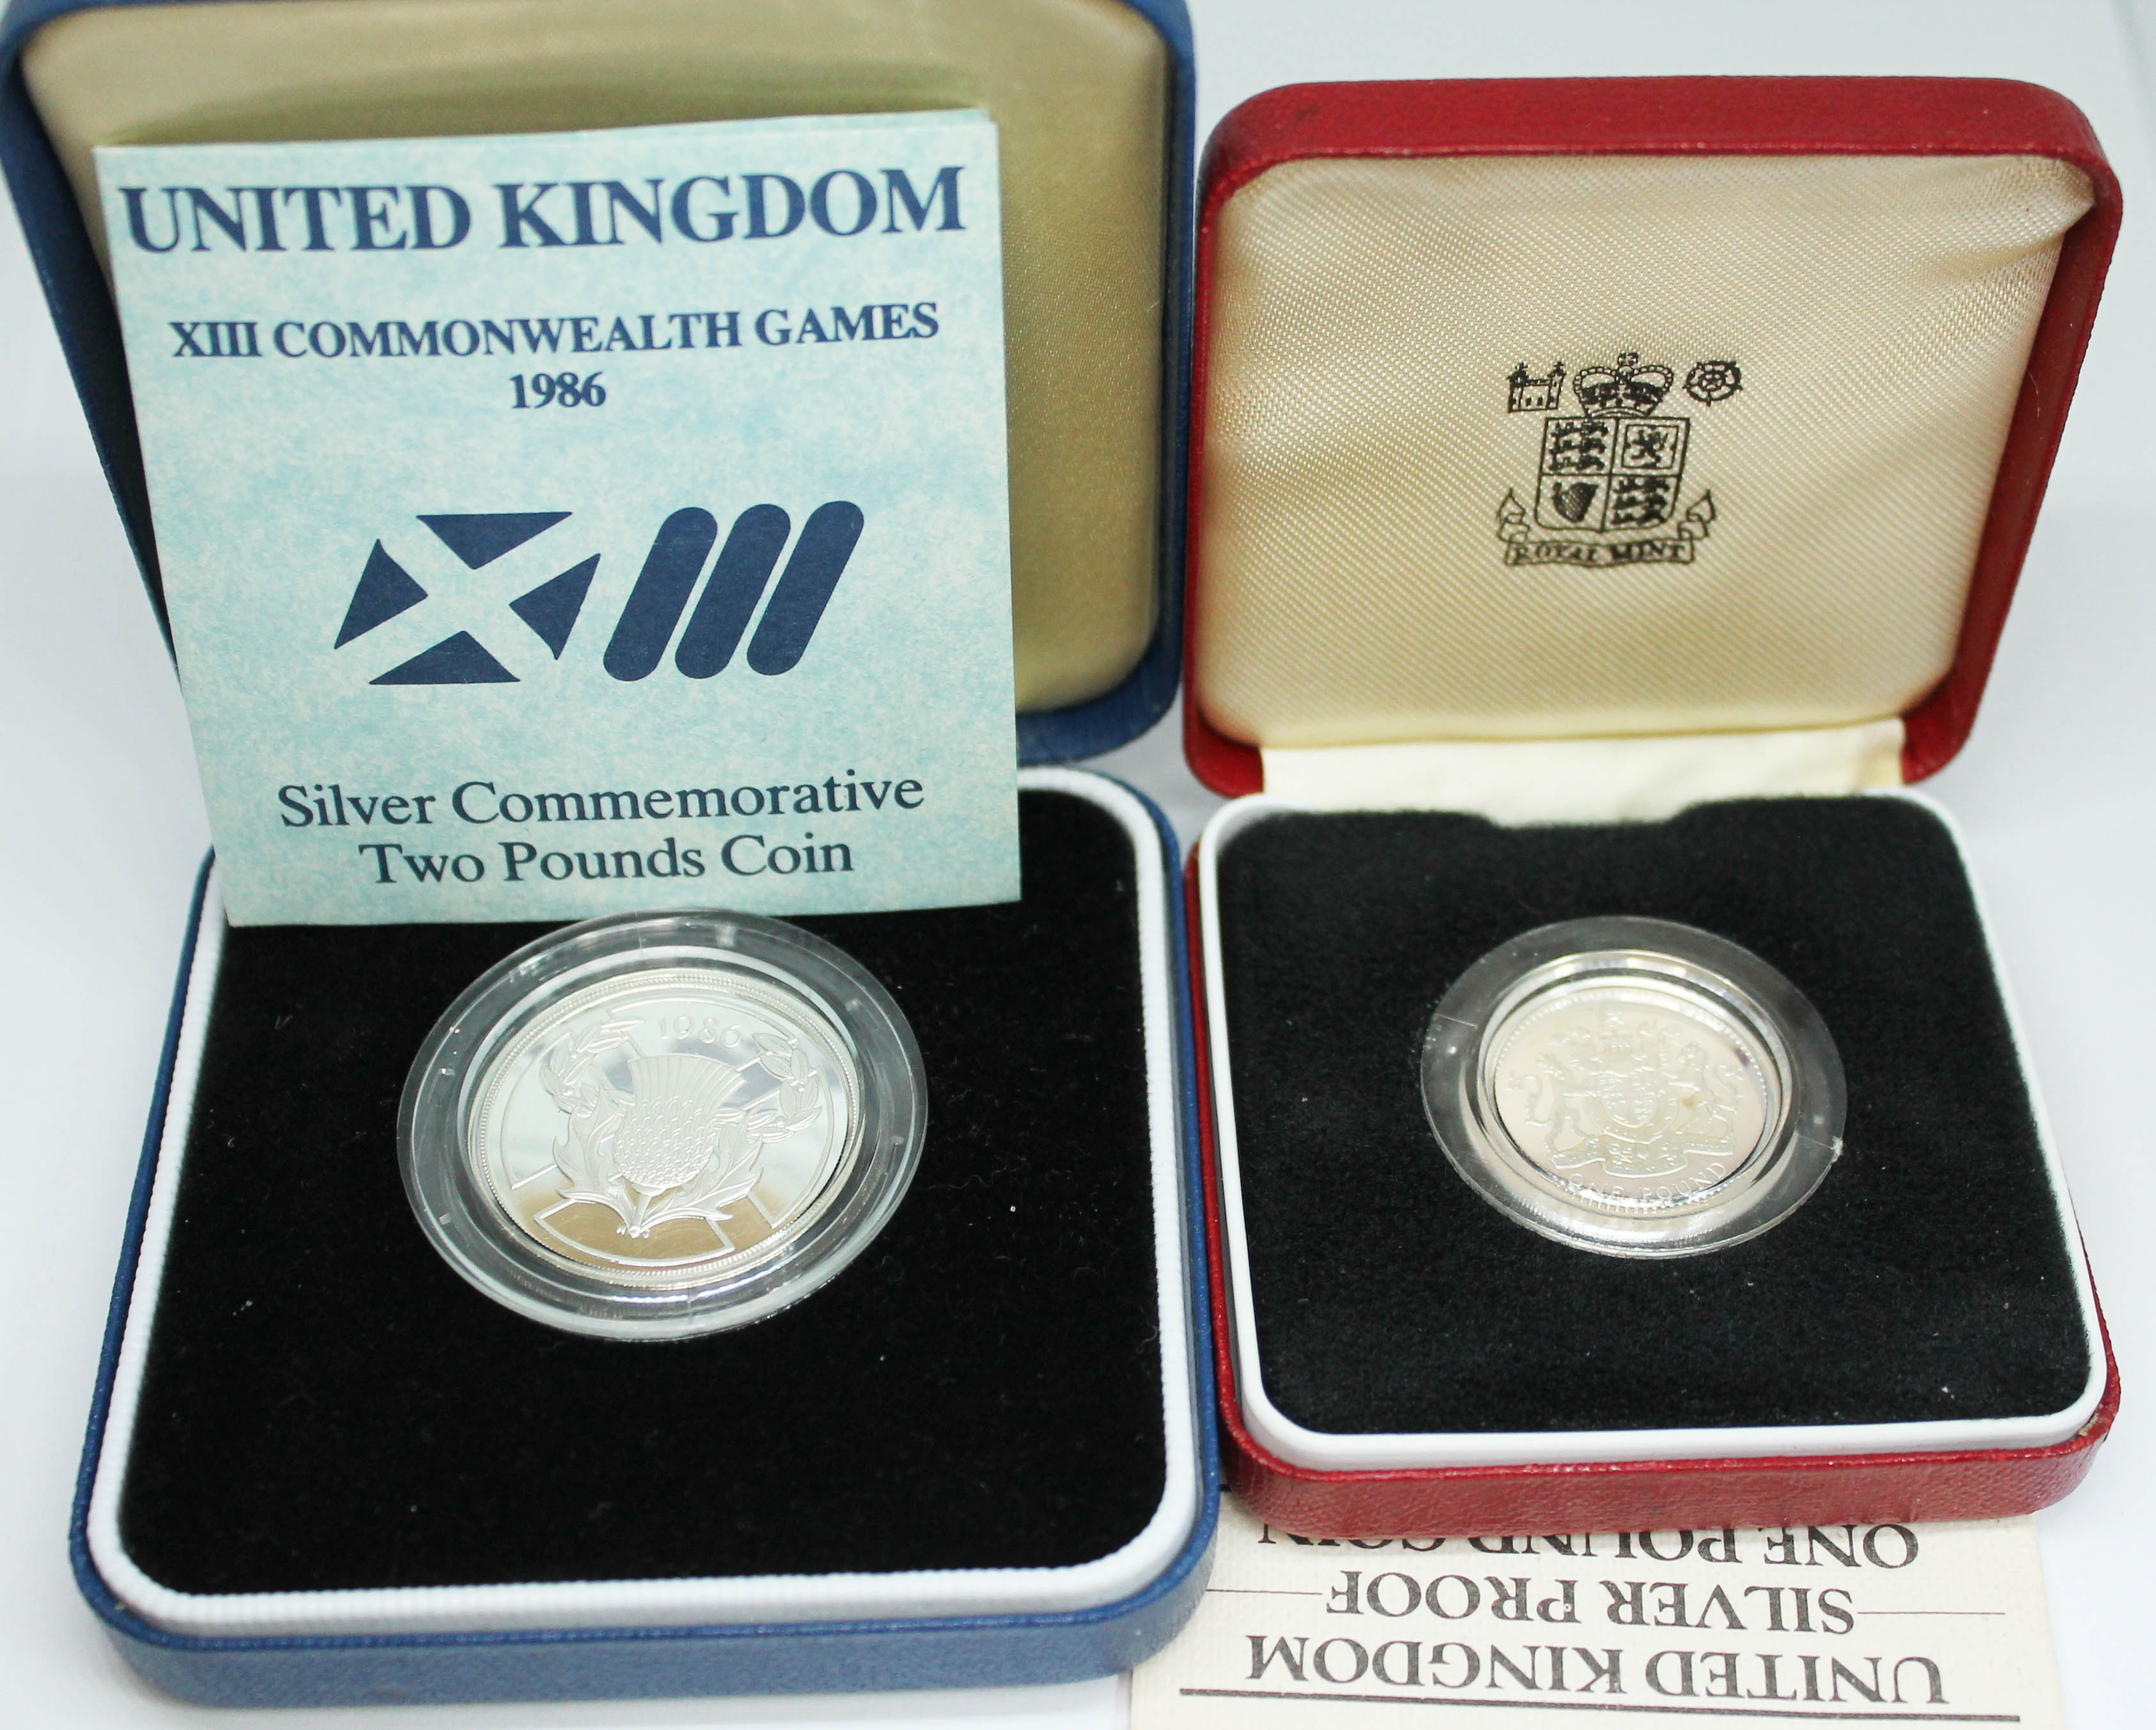 Royal Mint, Silver Commemorative two pound coin Scotland 1986, Elizabeth II, cased with